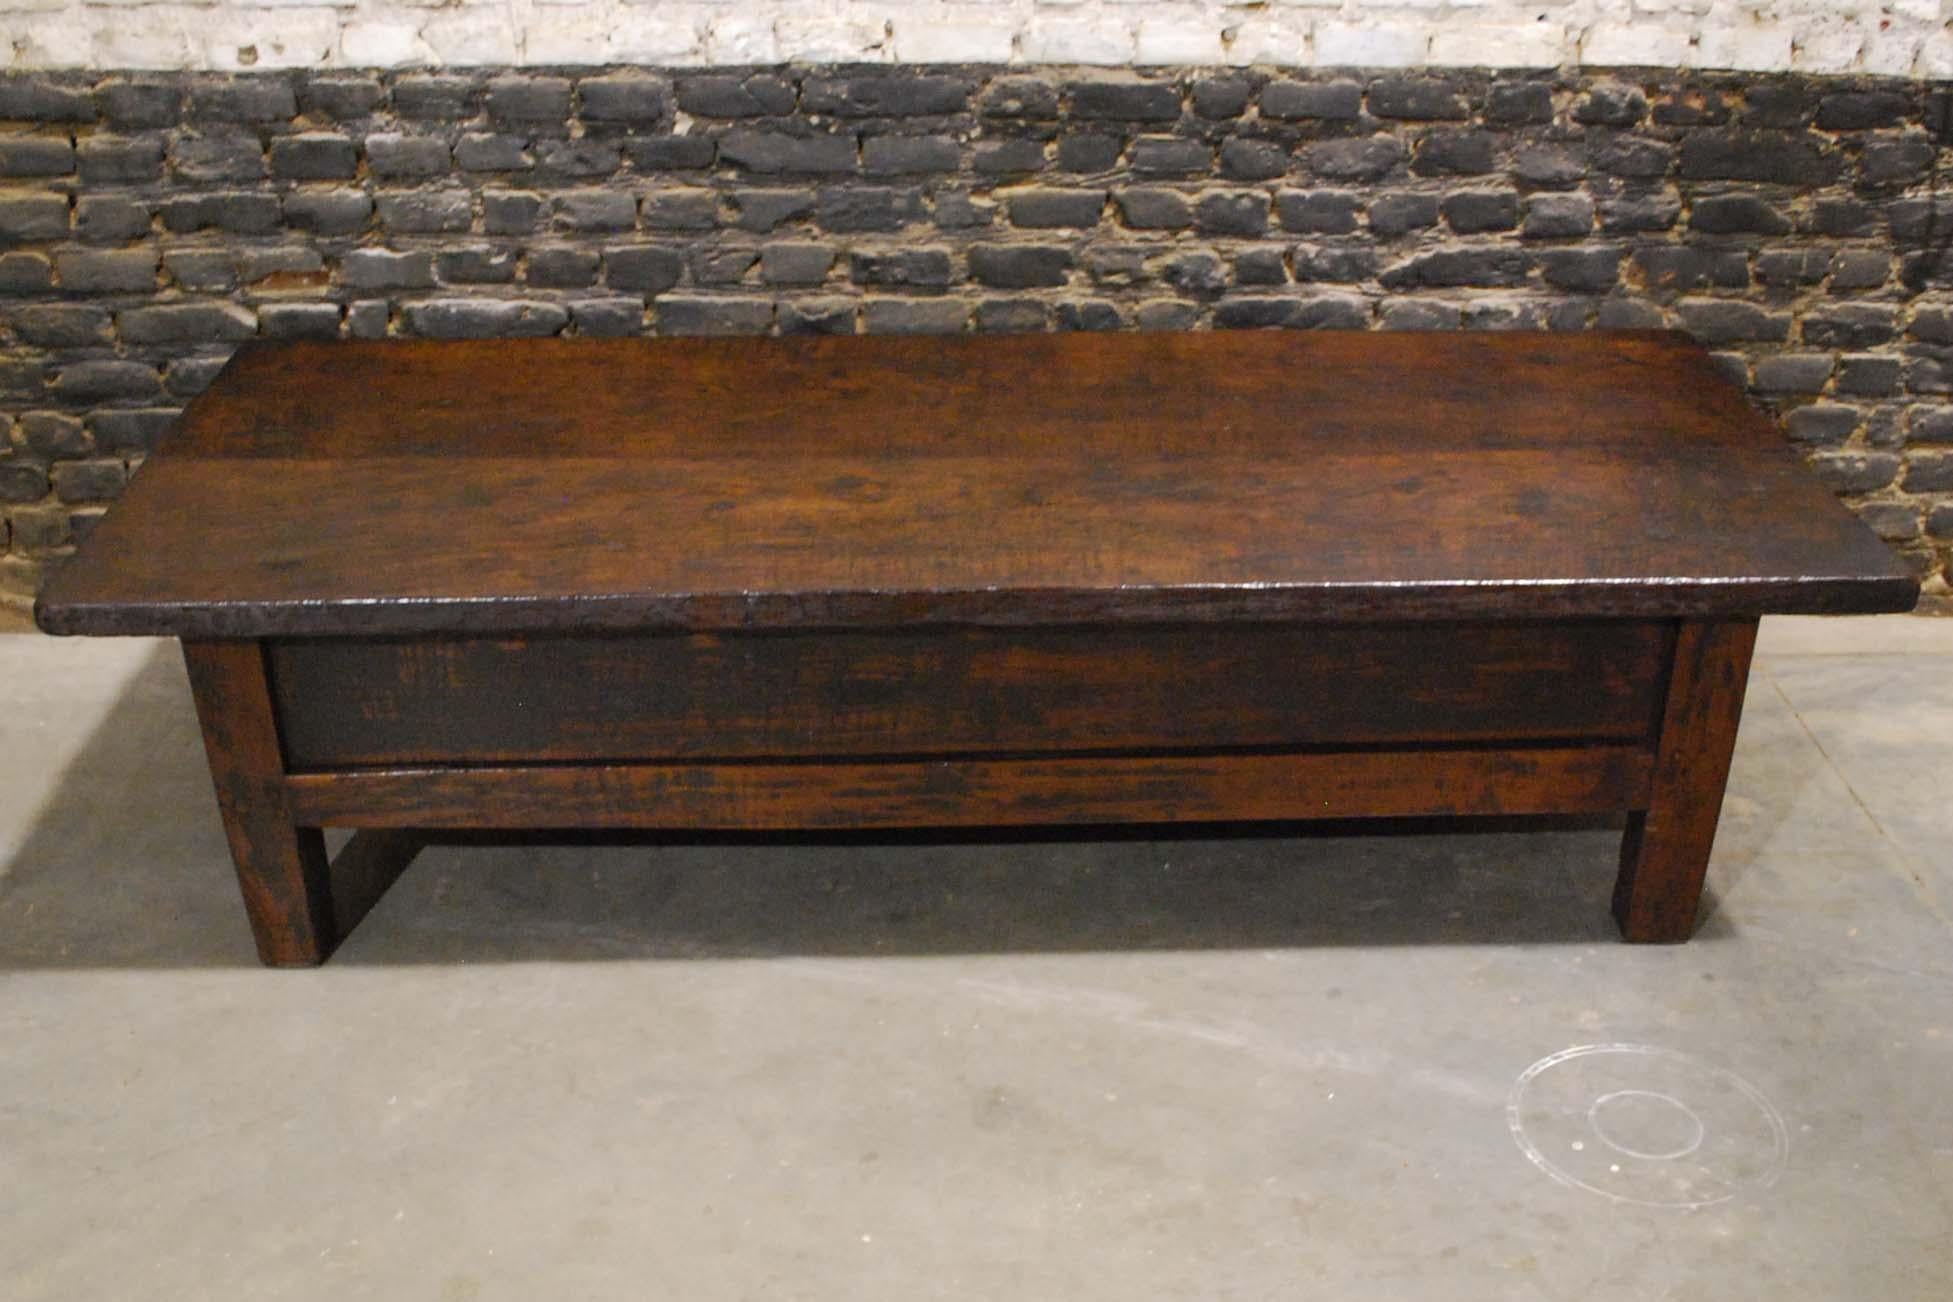 Forged Antique 18th Century Rustic Spanish Coffee Table in Chestnut Wood